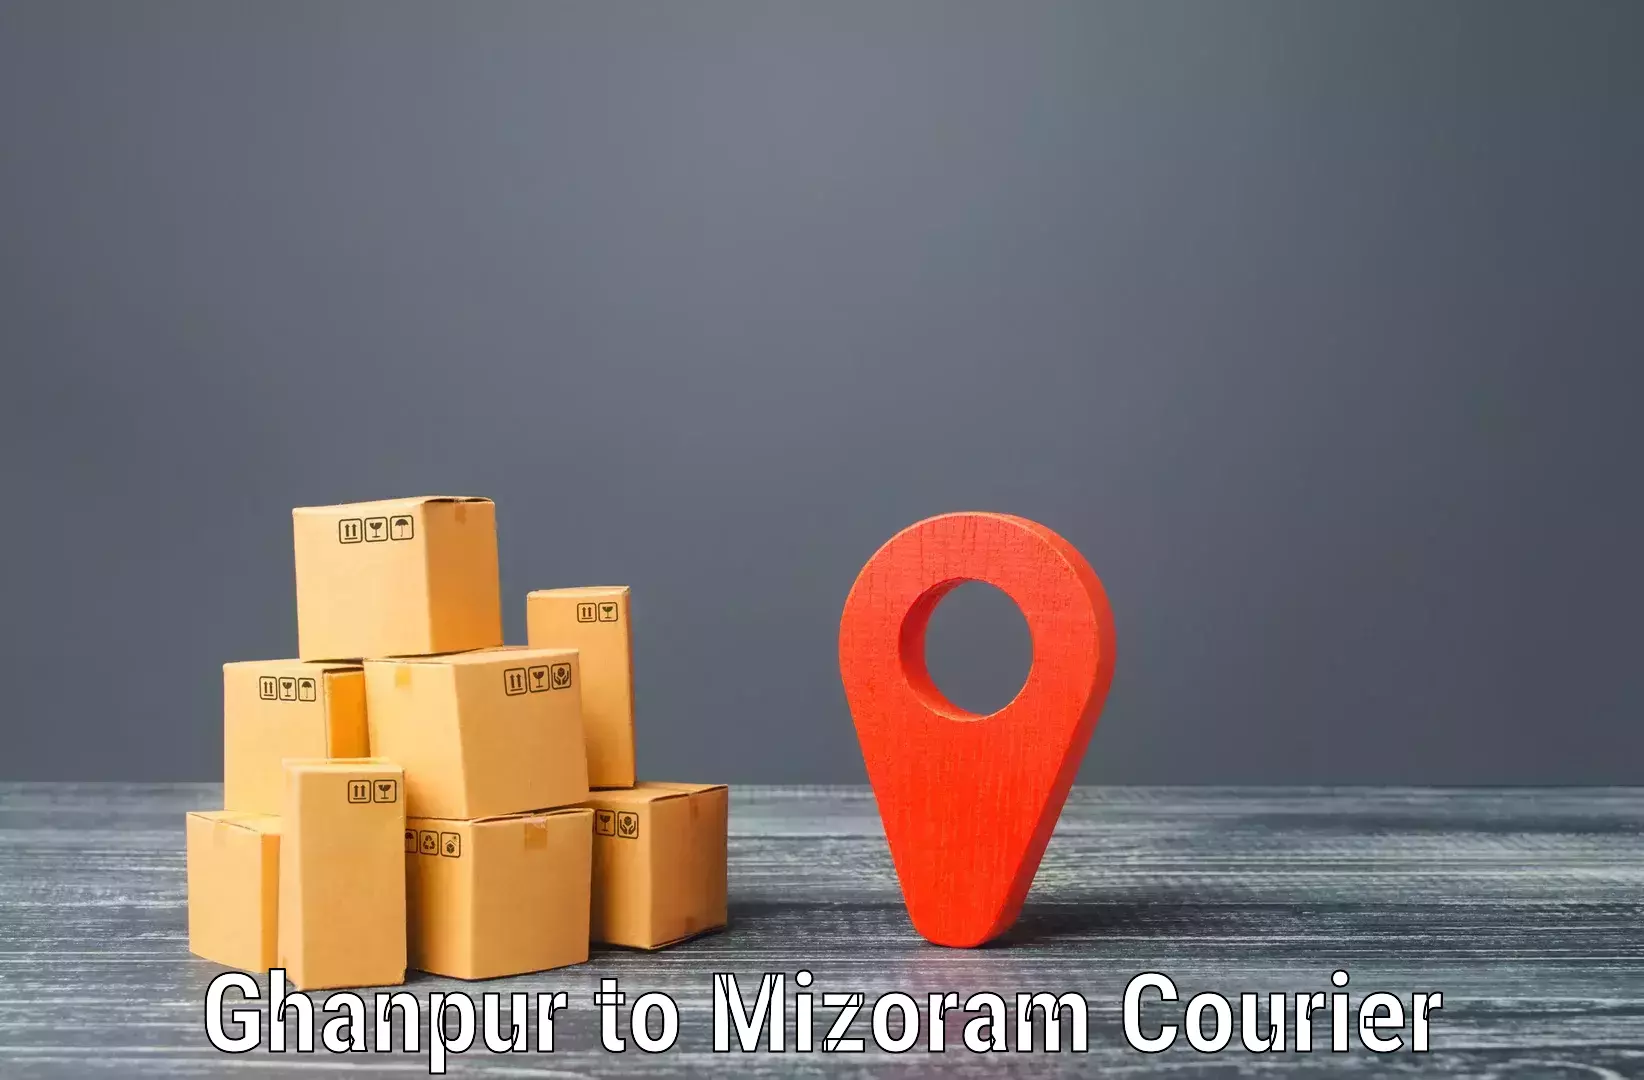 Online shipping calculator in Ghanpur to Saiha